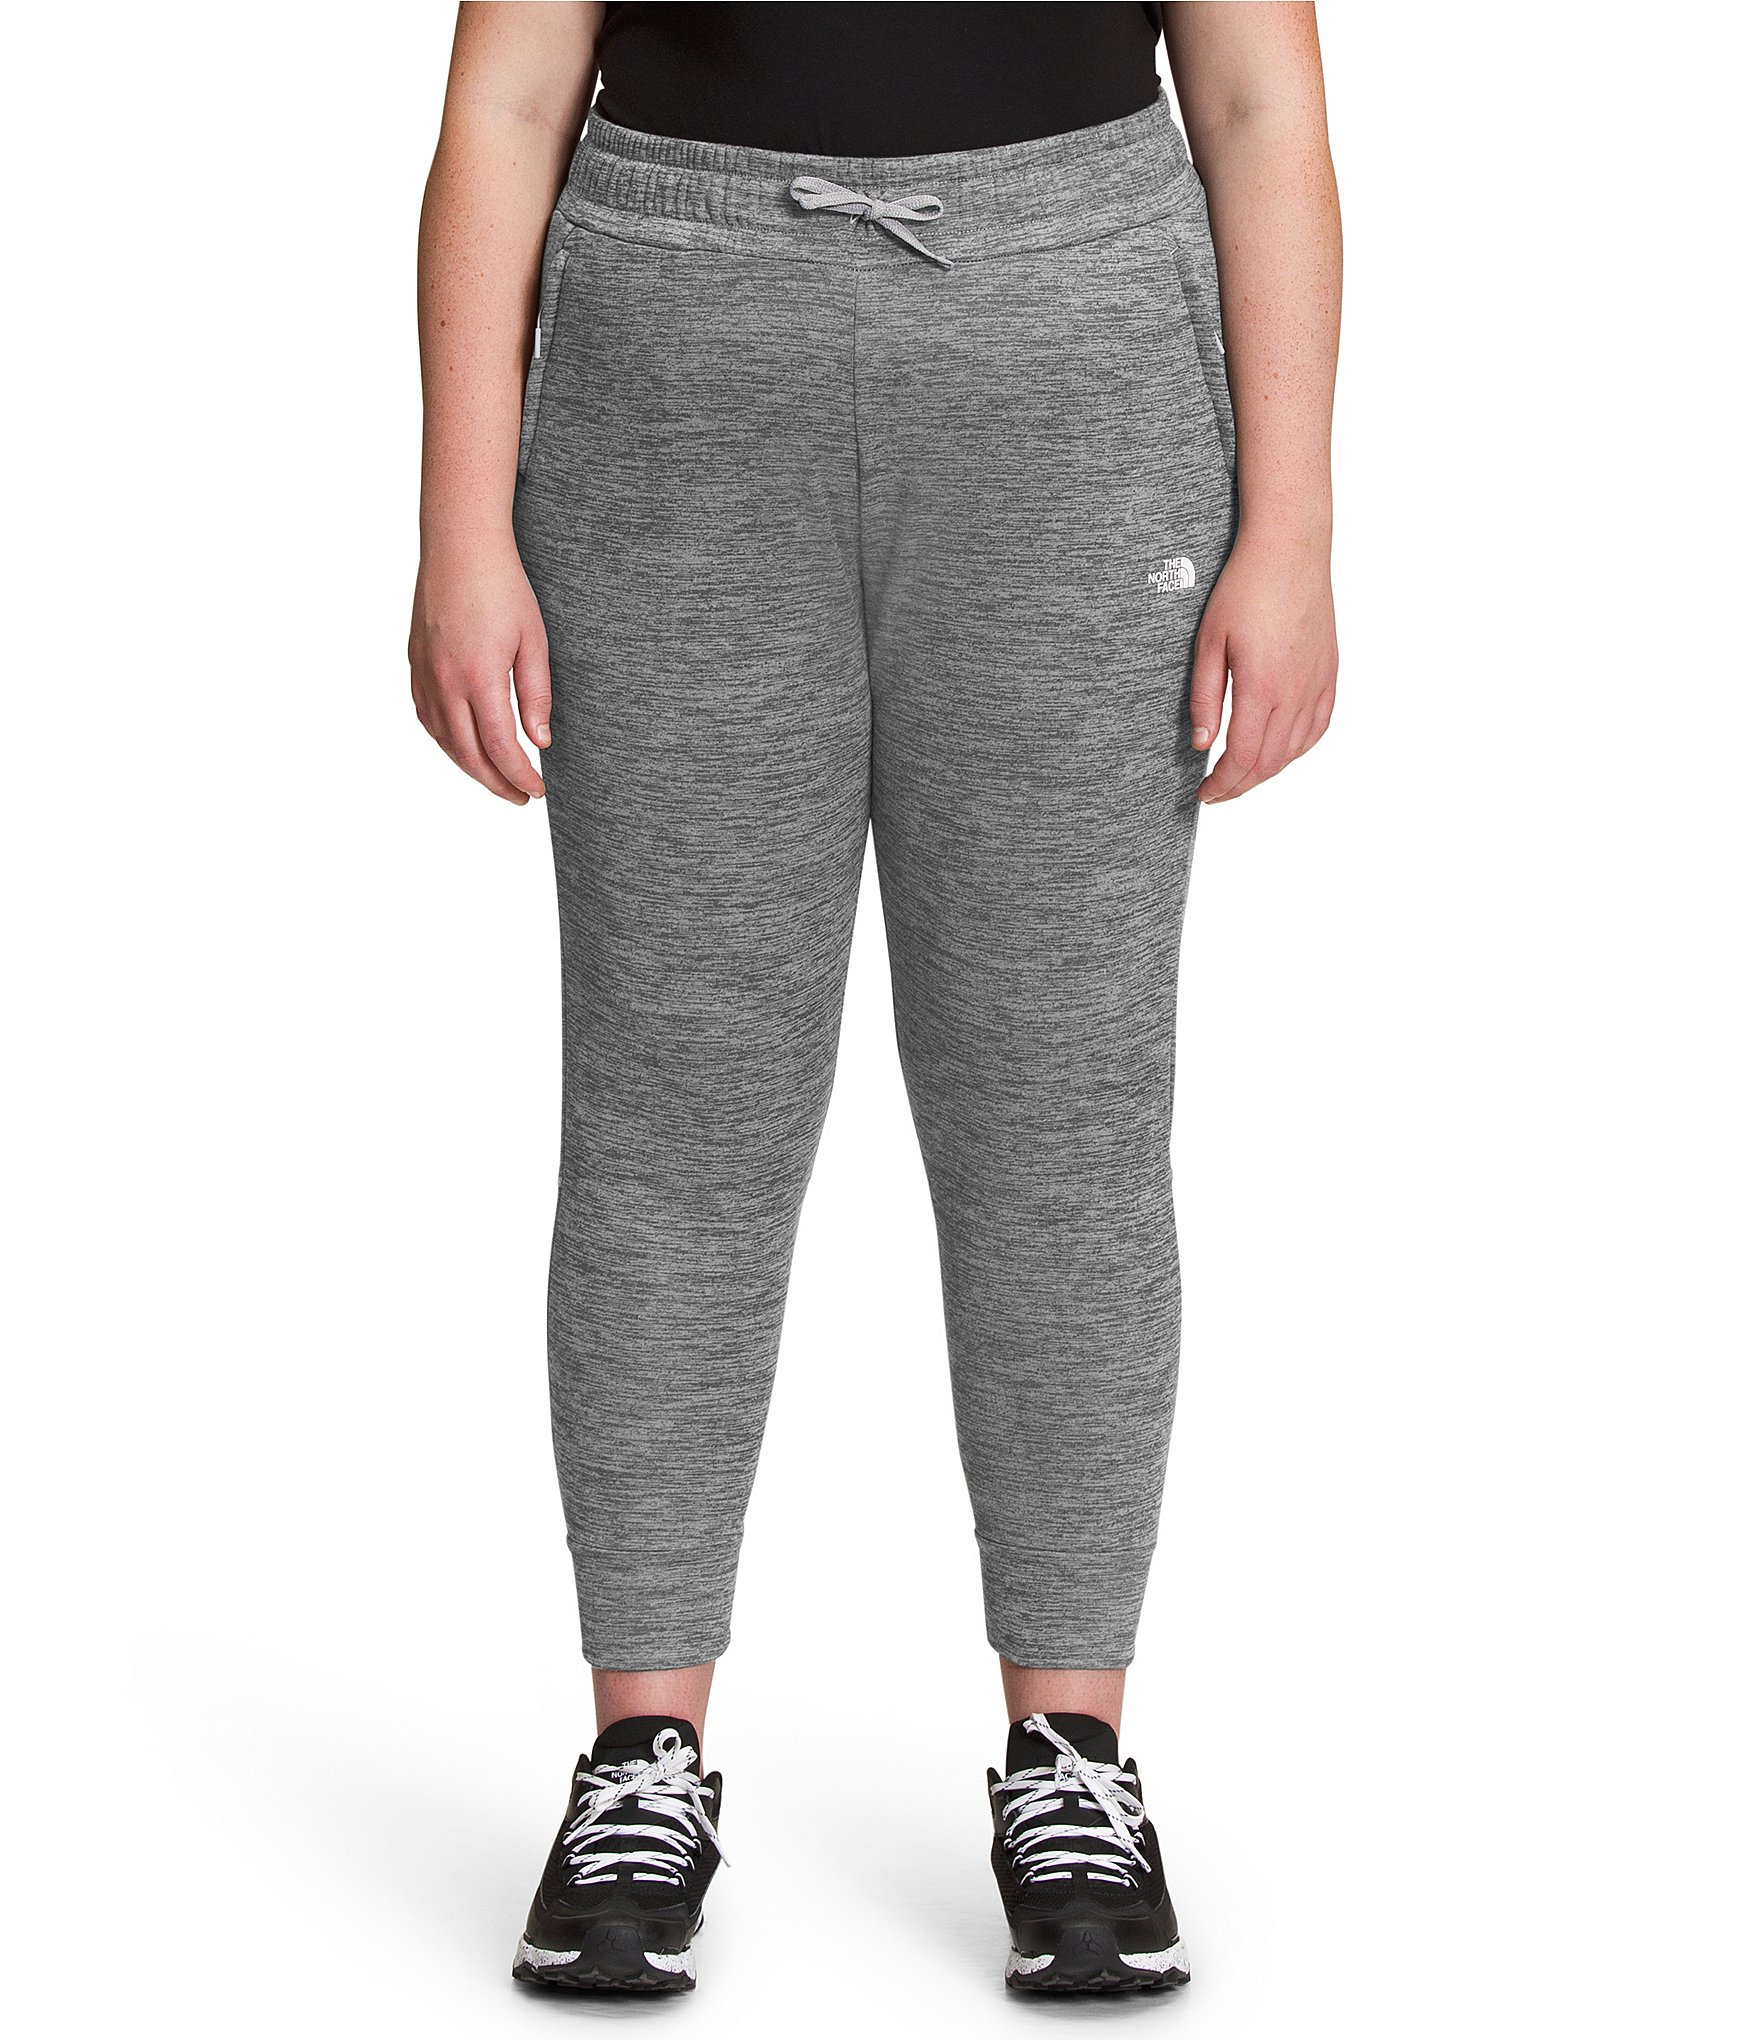 New Womens The North Face Canyonlands Athletic Pants Fleece Jogger  Sweatpants